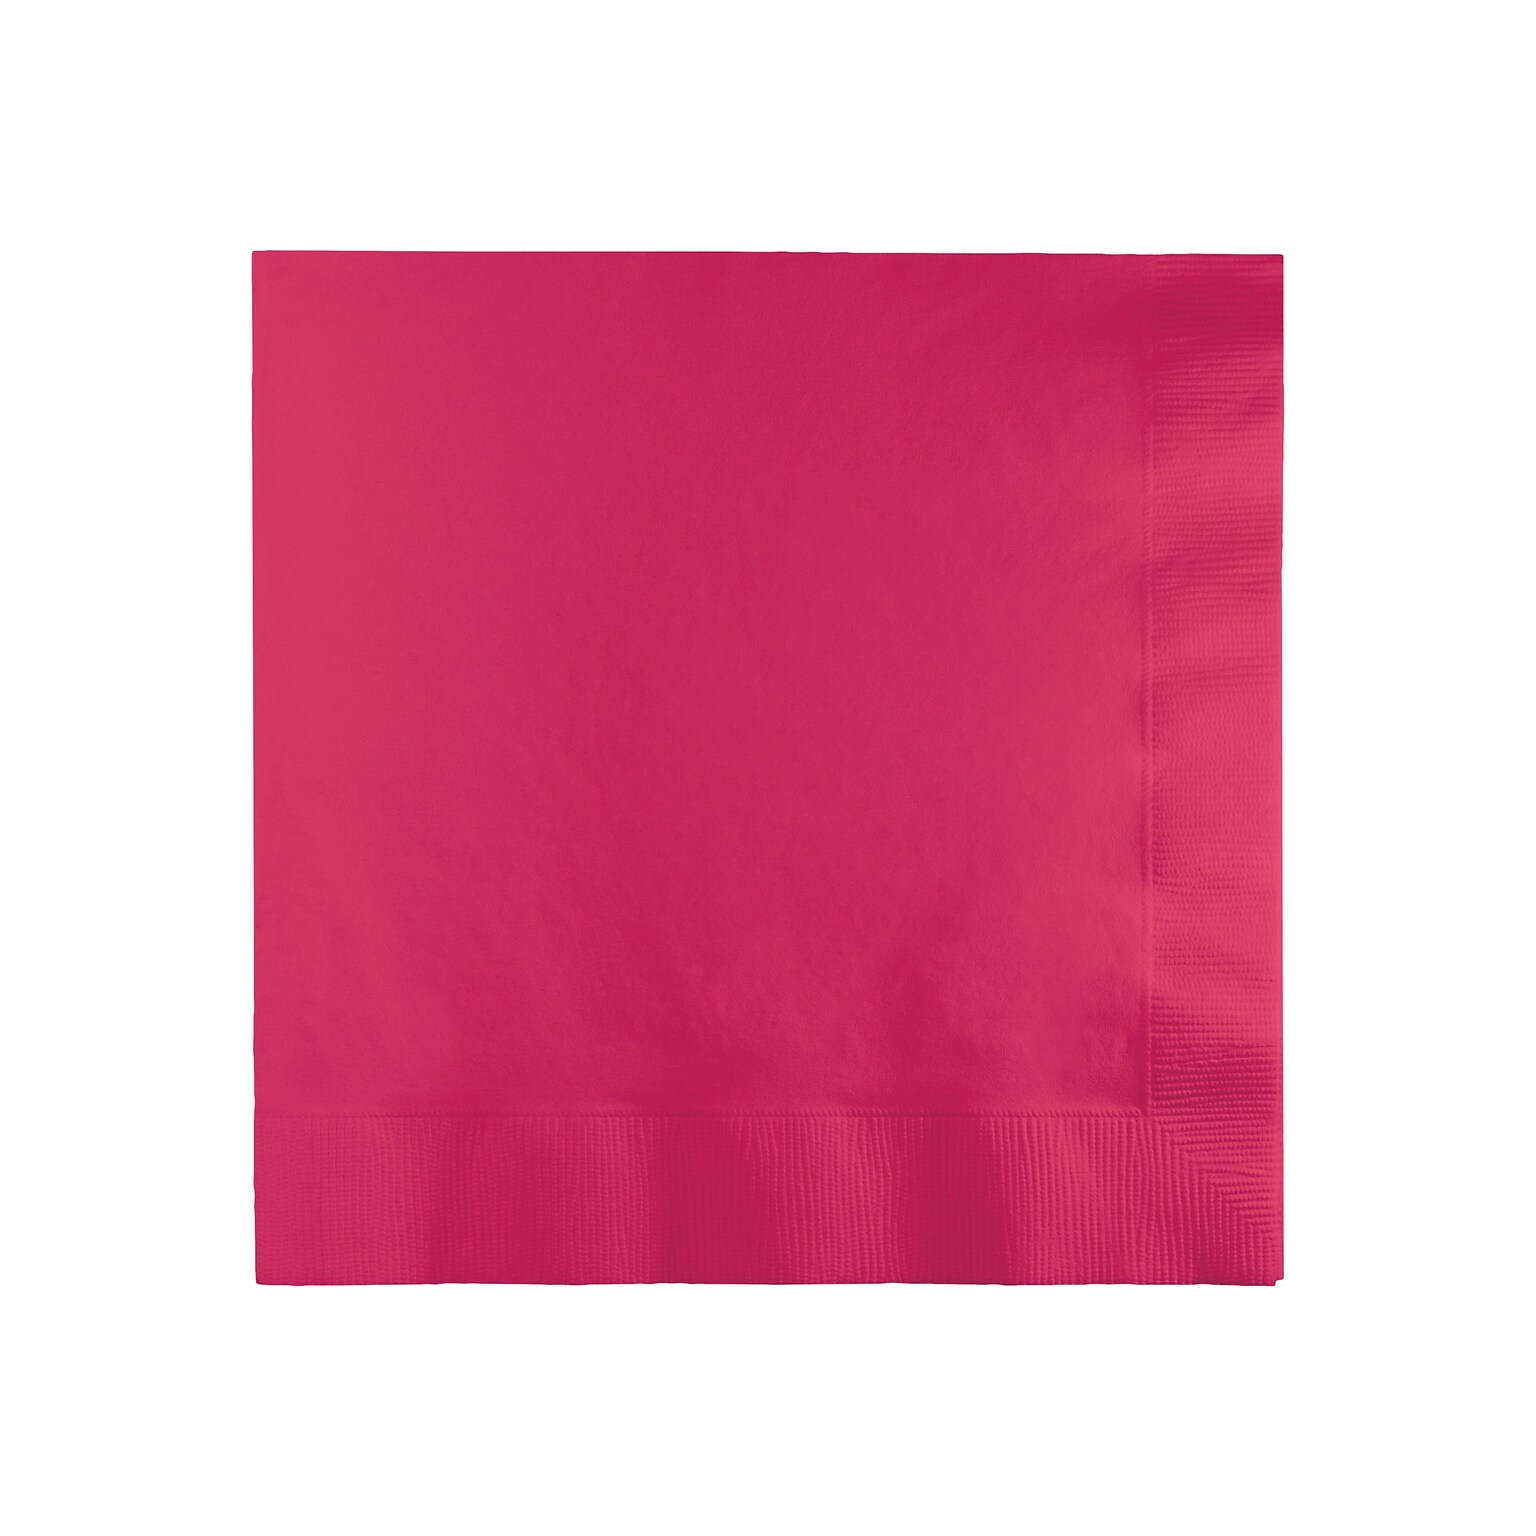 Creative Converting Touch of Color Lunch Napkin, 2-ply, Hot Magenta Pink, 150 Napkins/Pack (DTC139197135NAP)